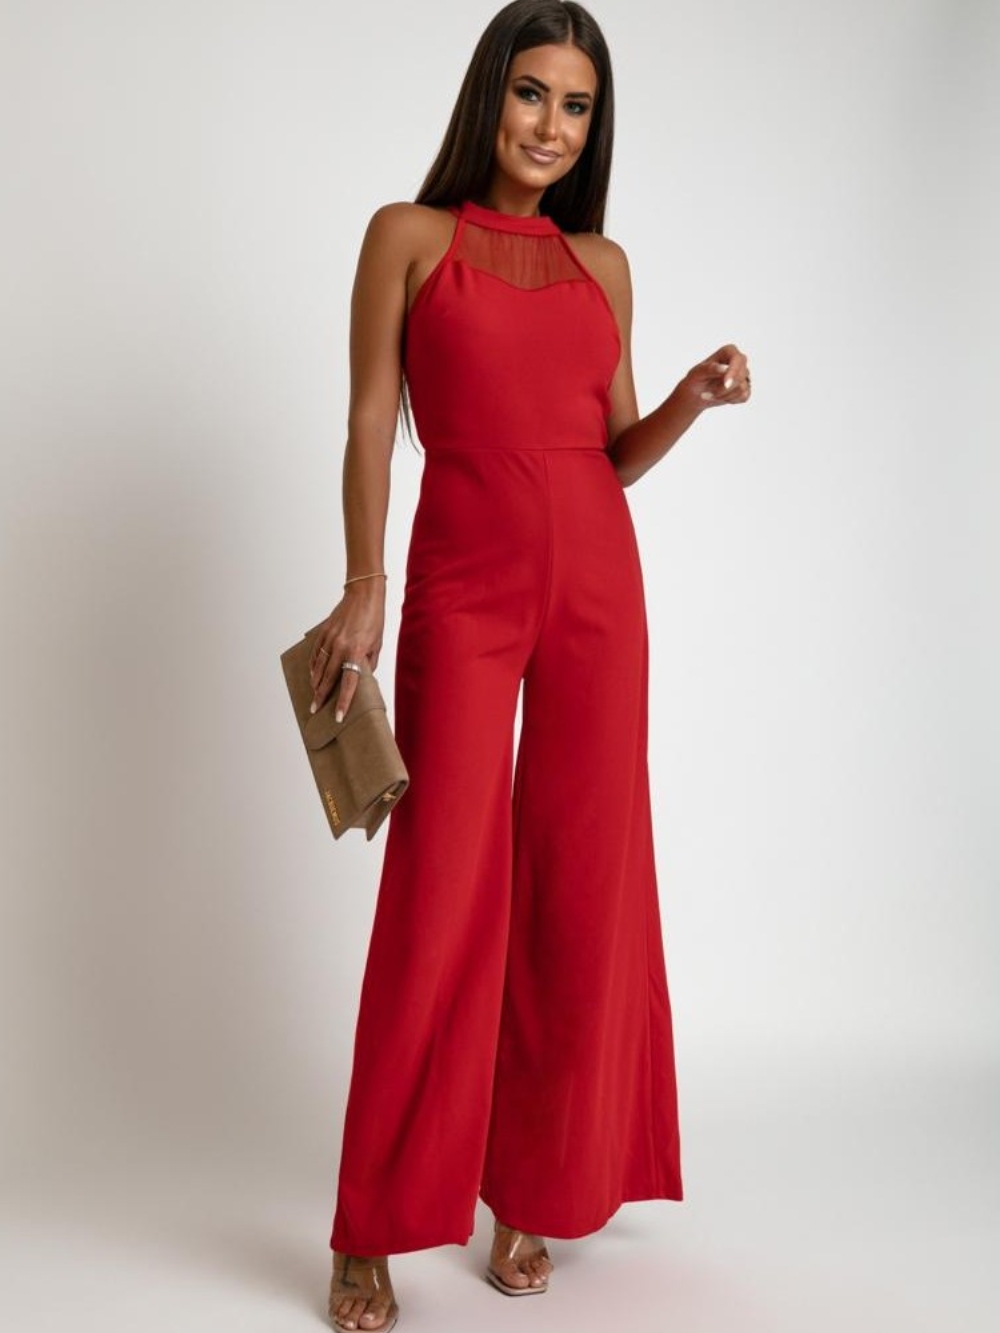 Red jumpsuit with a stand-up collar for wide legs